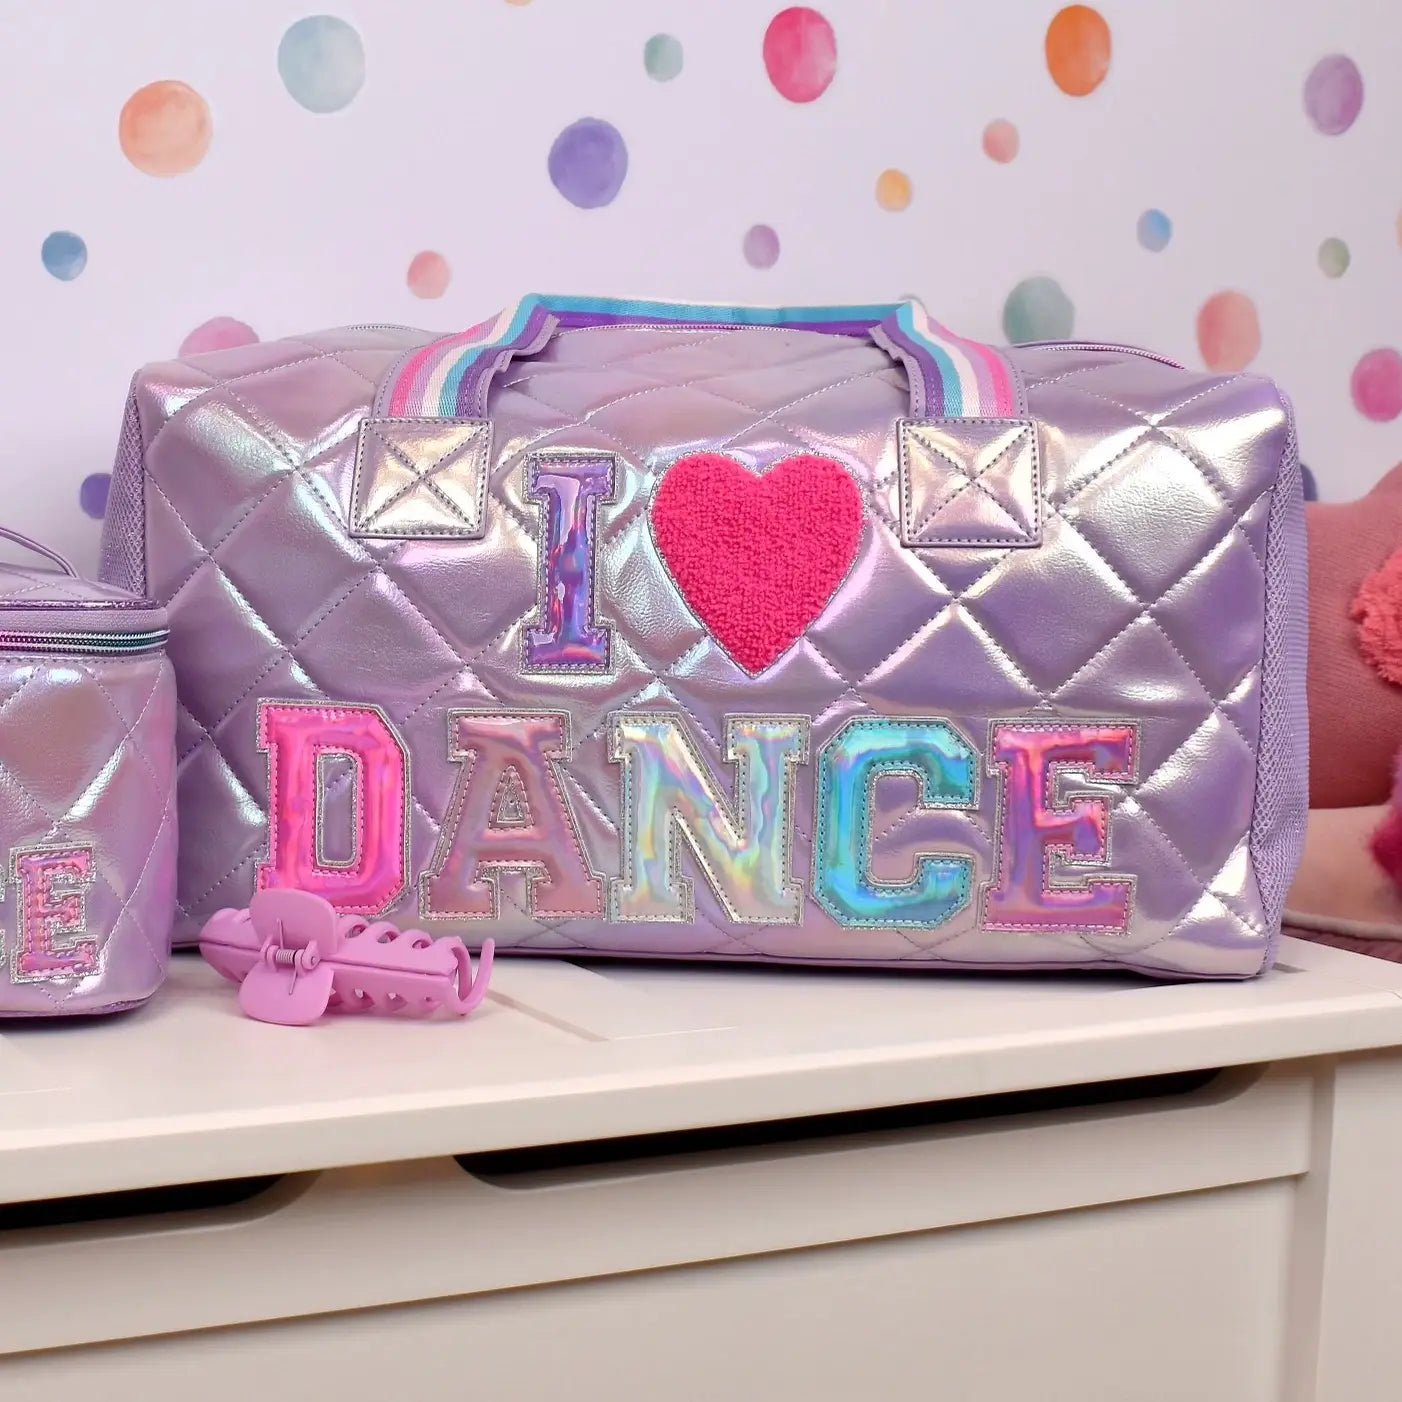 'dance' Quilted Metallic Lavender Duffle Bag